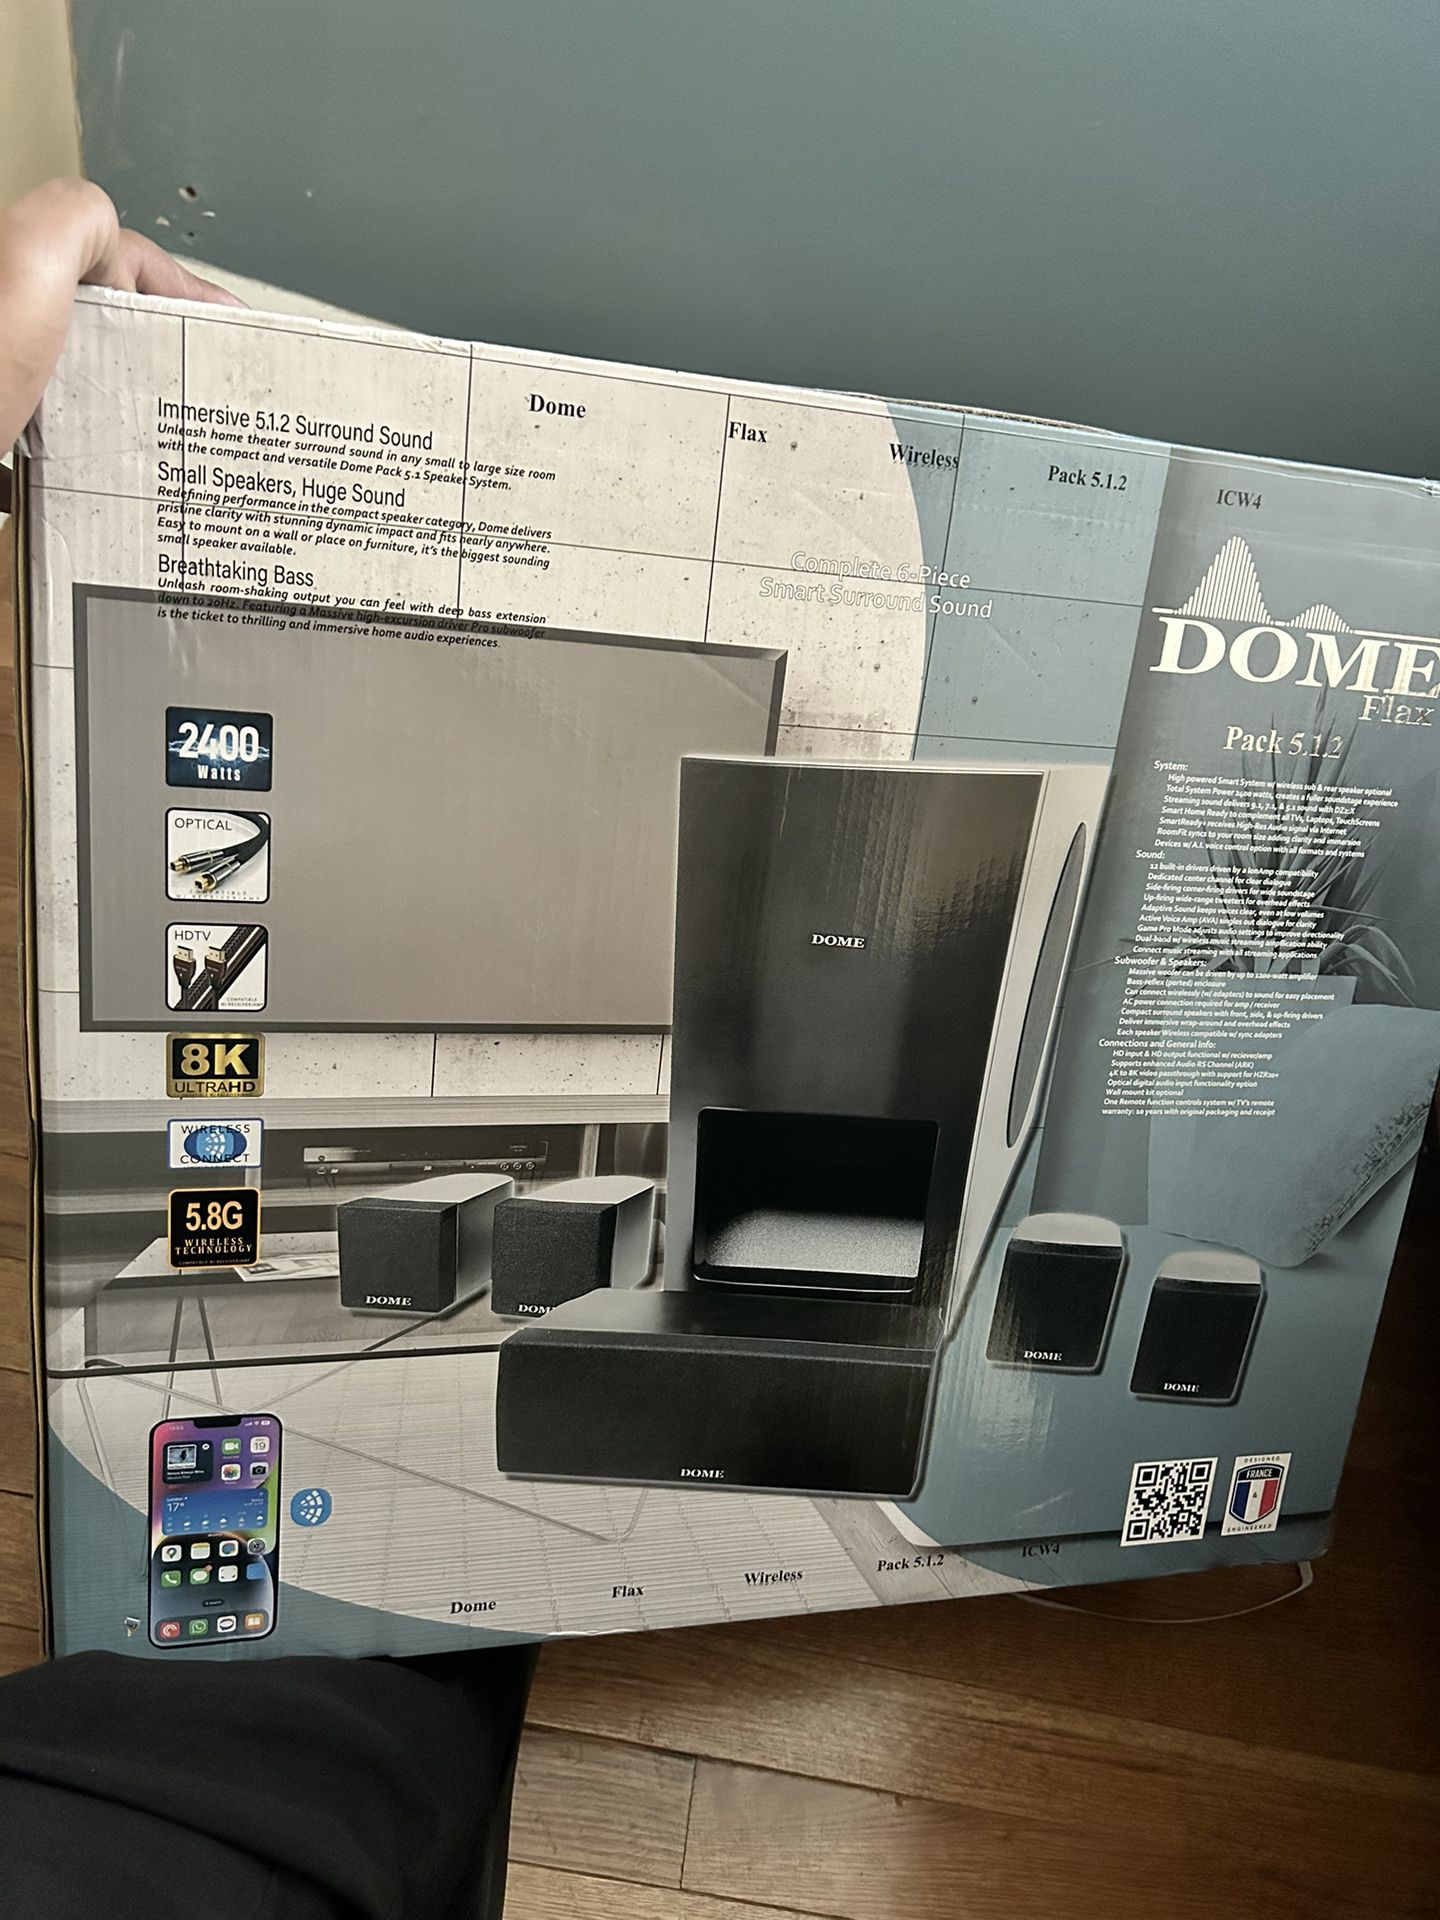 Dome Flax Pack 5.1.2 Home Theater System 